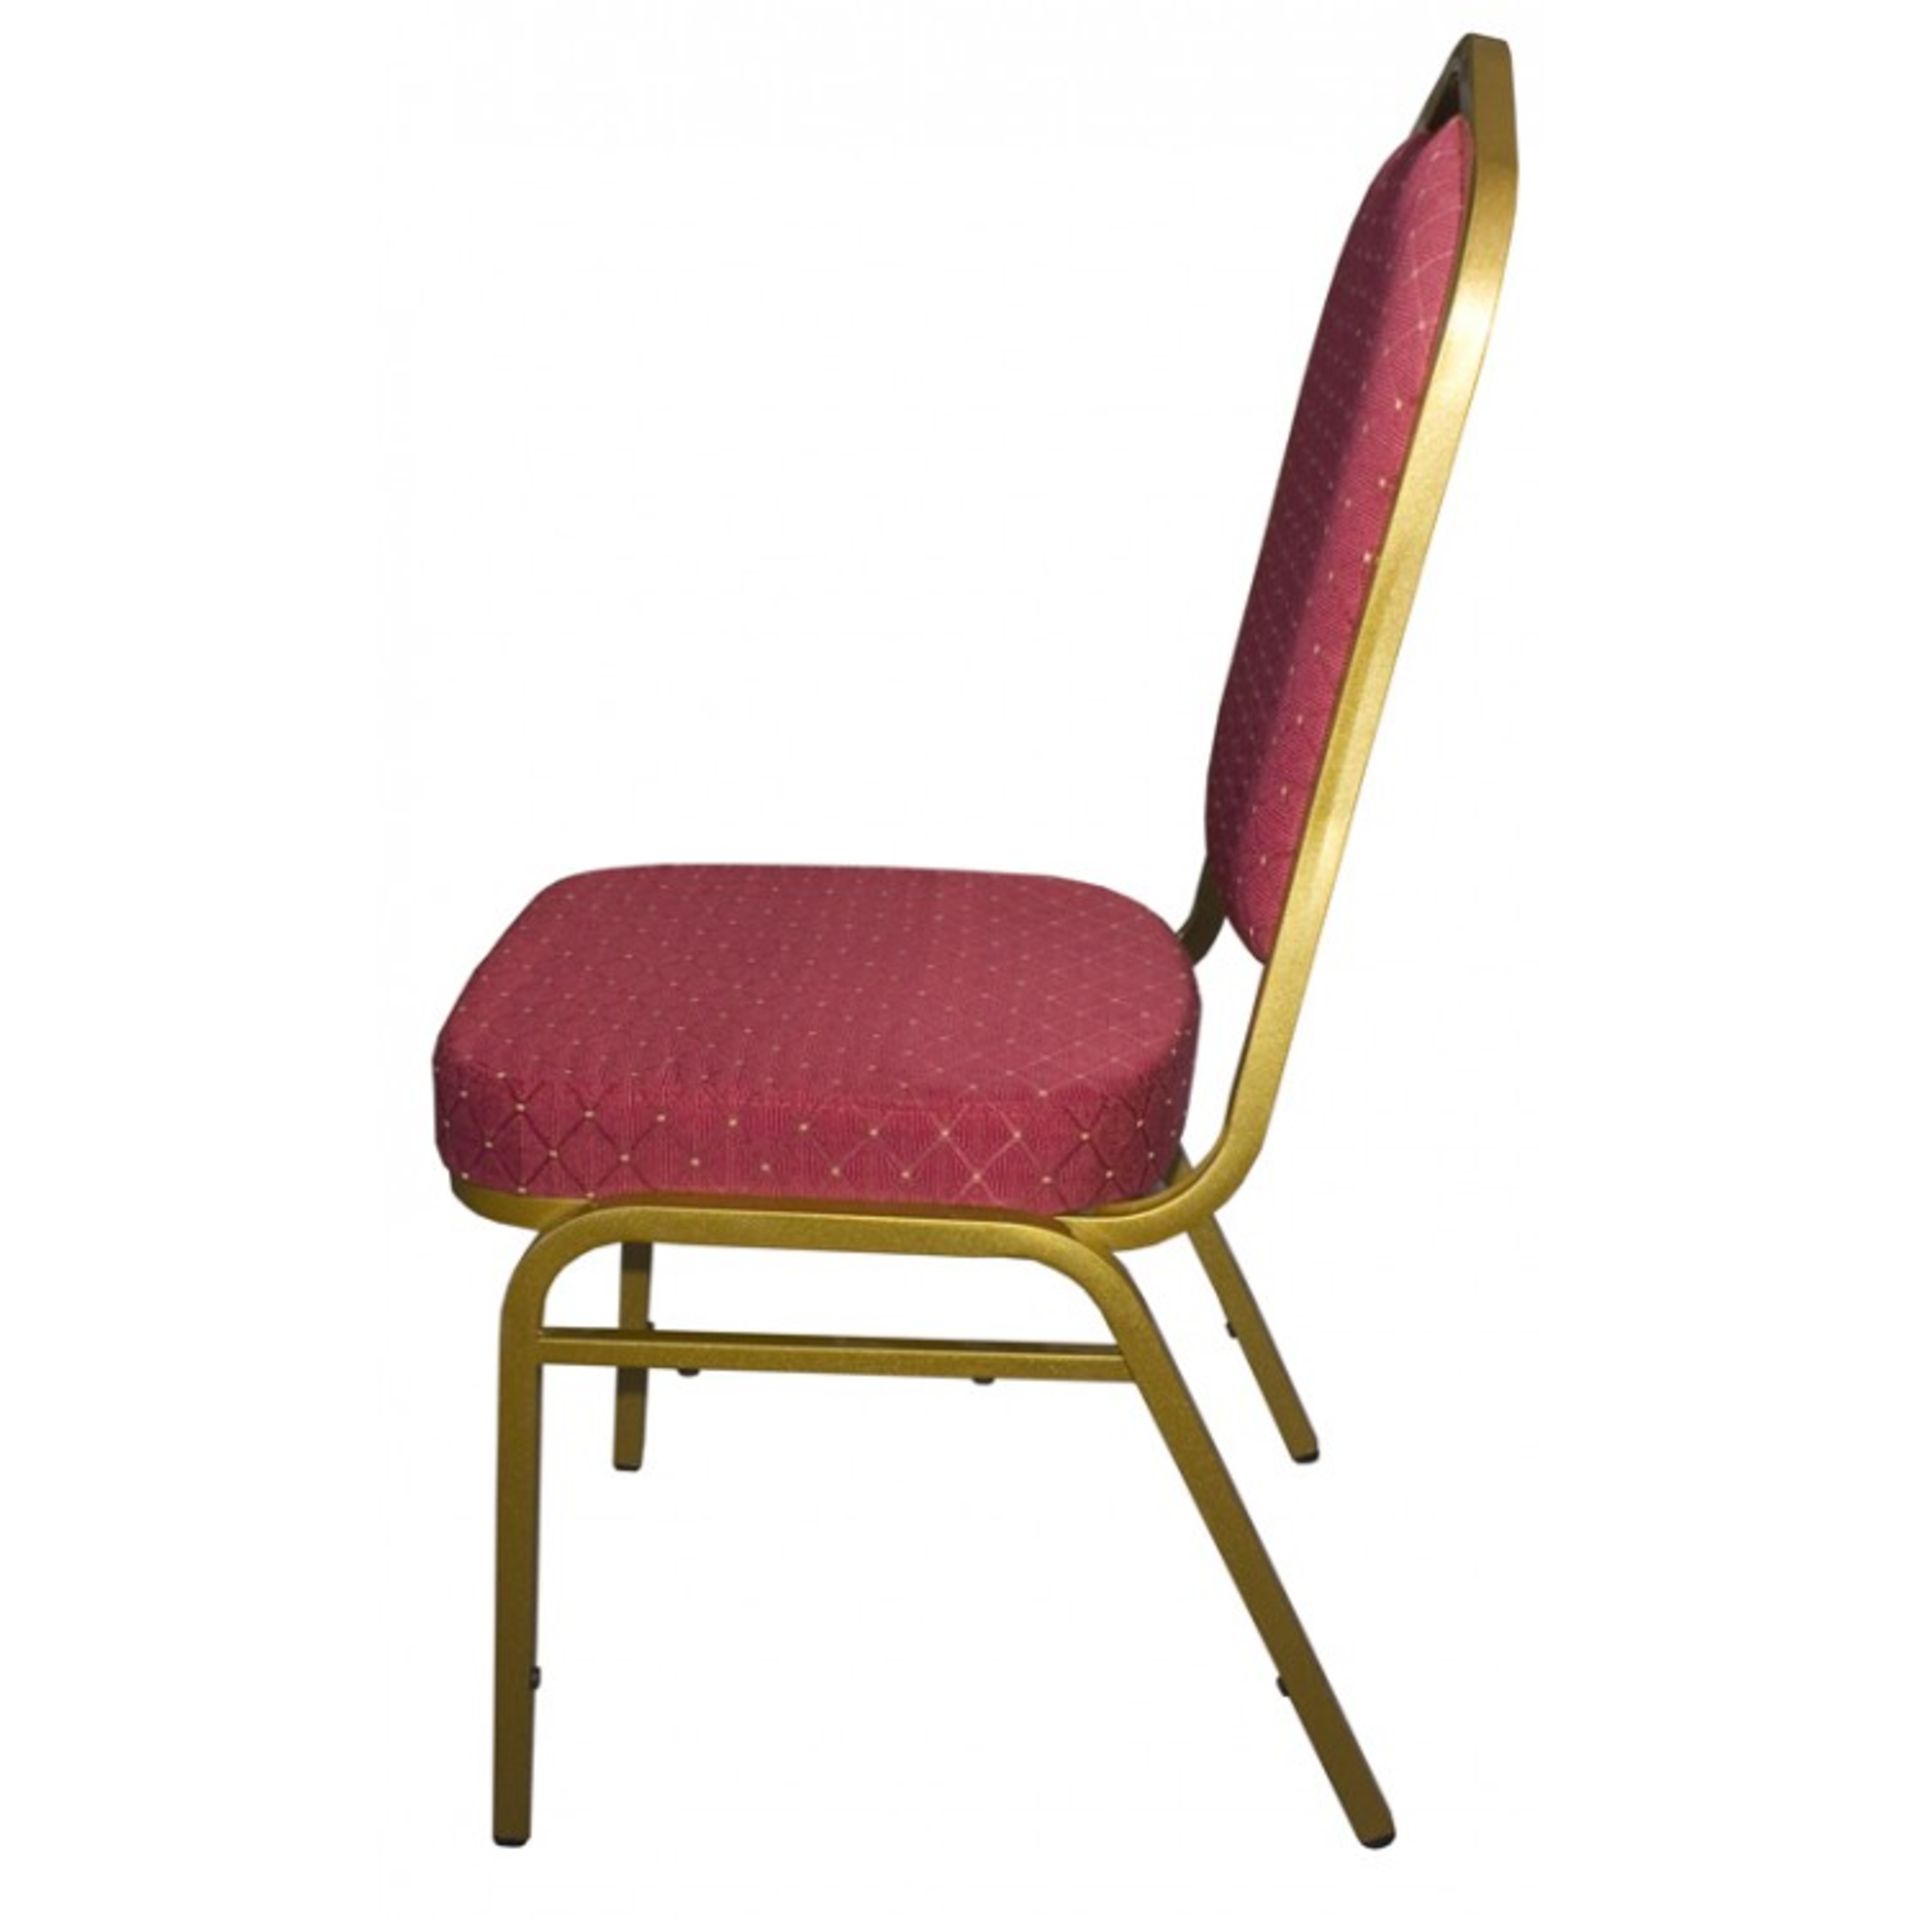 100 x Burgundy Steel Banqueting Chairs - BRAND NEW

Brand new & unused. Made with a burgundy - Image 2 of 4